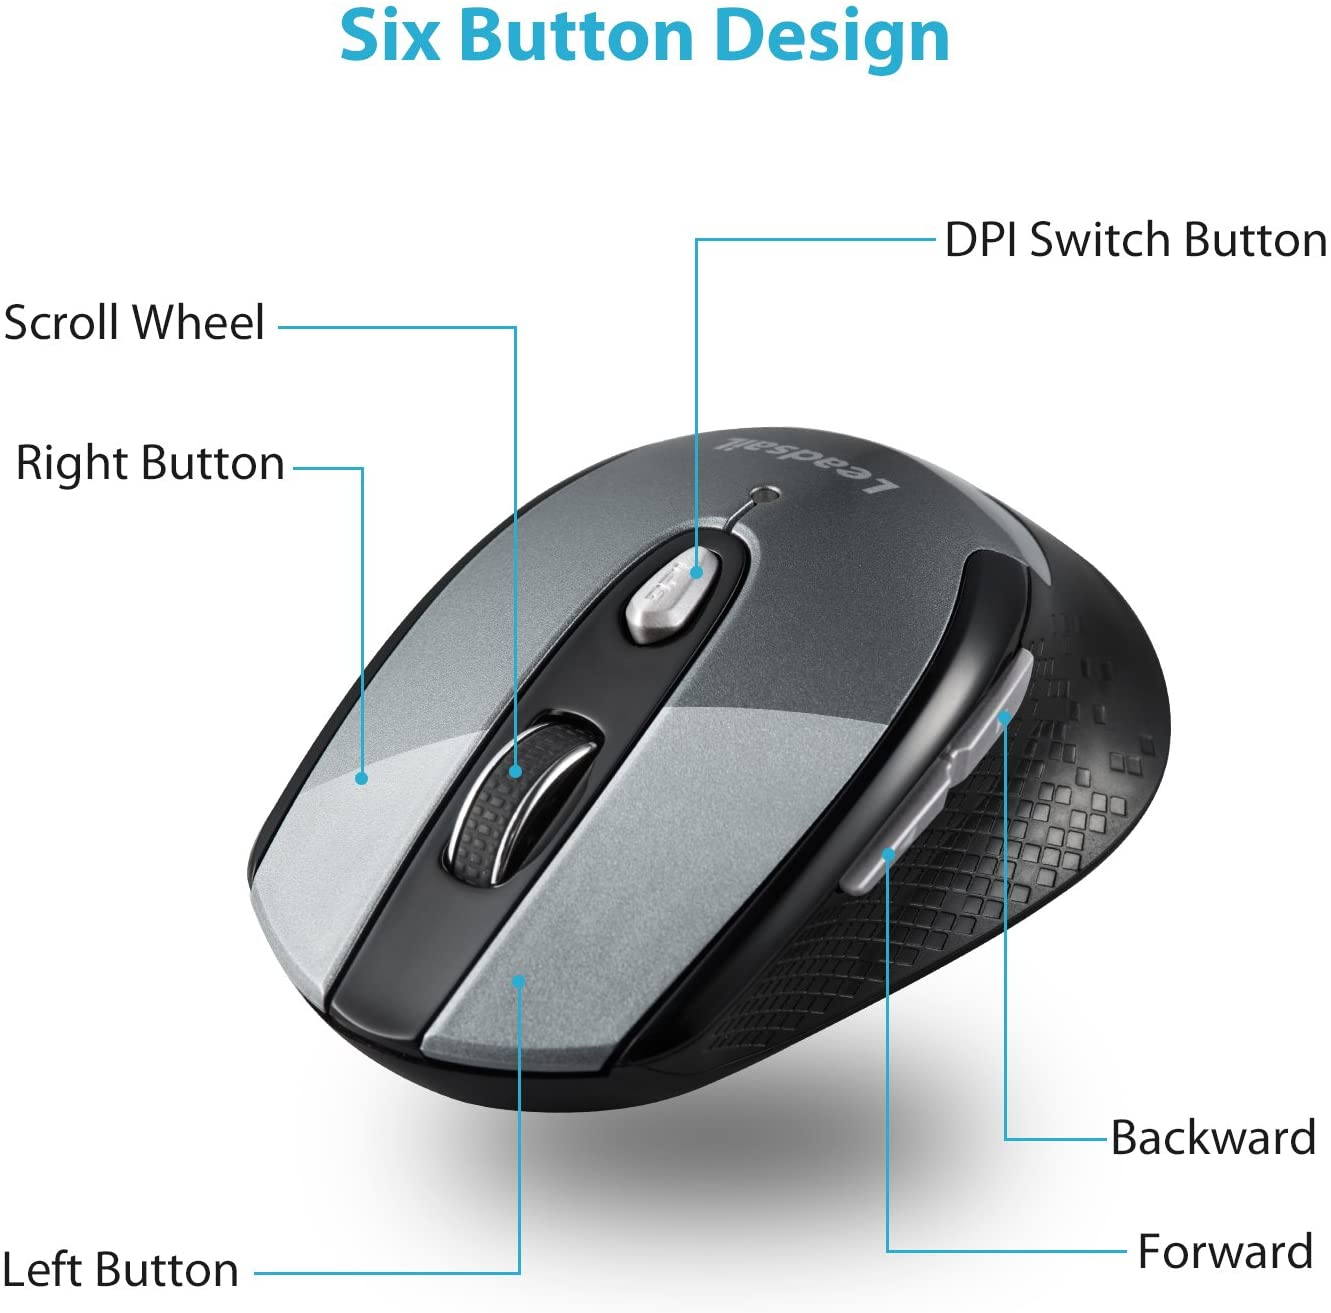 Wireless Mouse for Laptop, 2.4G Portable Slim Cordless Computer Mouse Less Noise for Laptop Optical Mouse with 6 Buttons, USB Mouse for Windows 10/8/7/Mac/Macbook Pro/Air/Hp/Dell/Lenovo/Acer